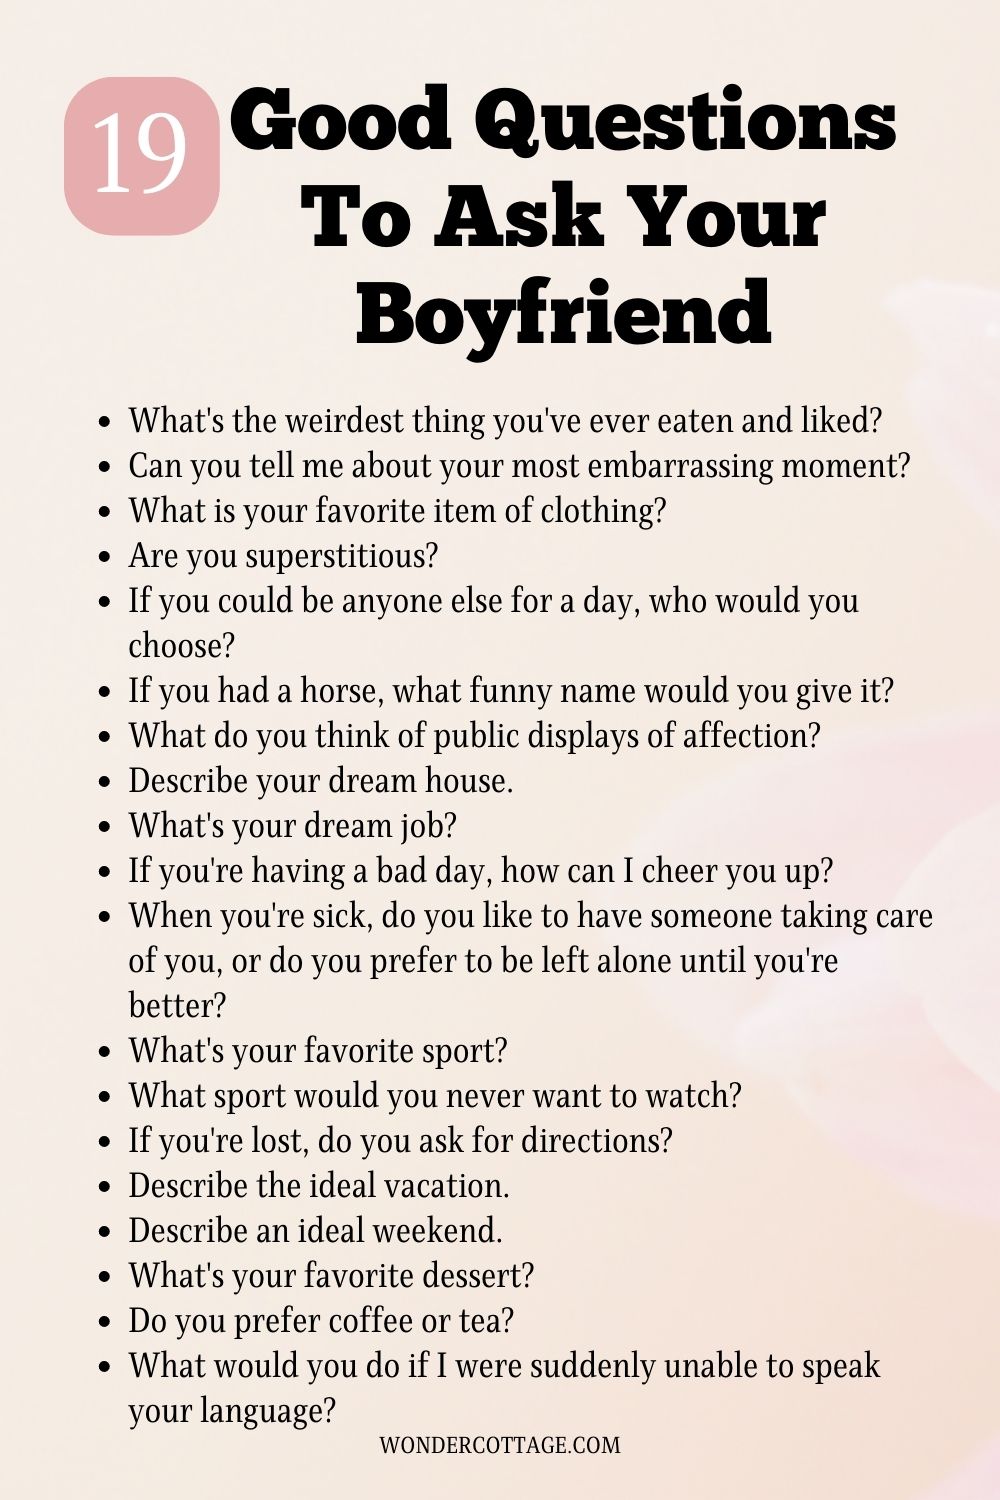 Good Questions To Ask Your Boyfriend